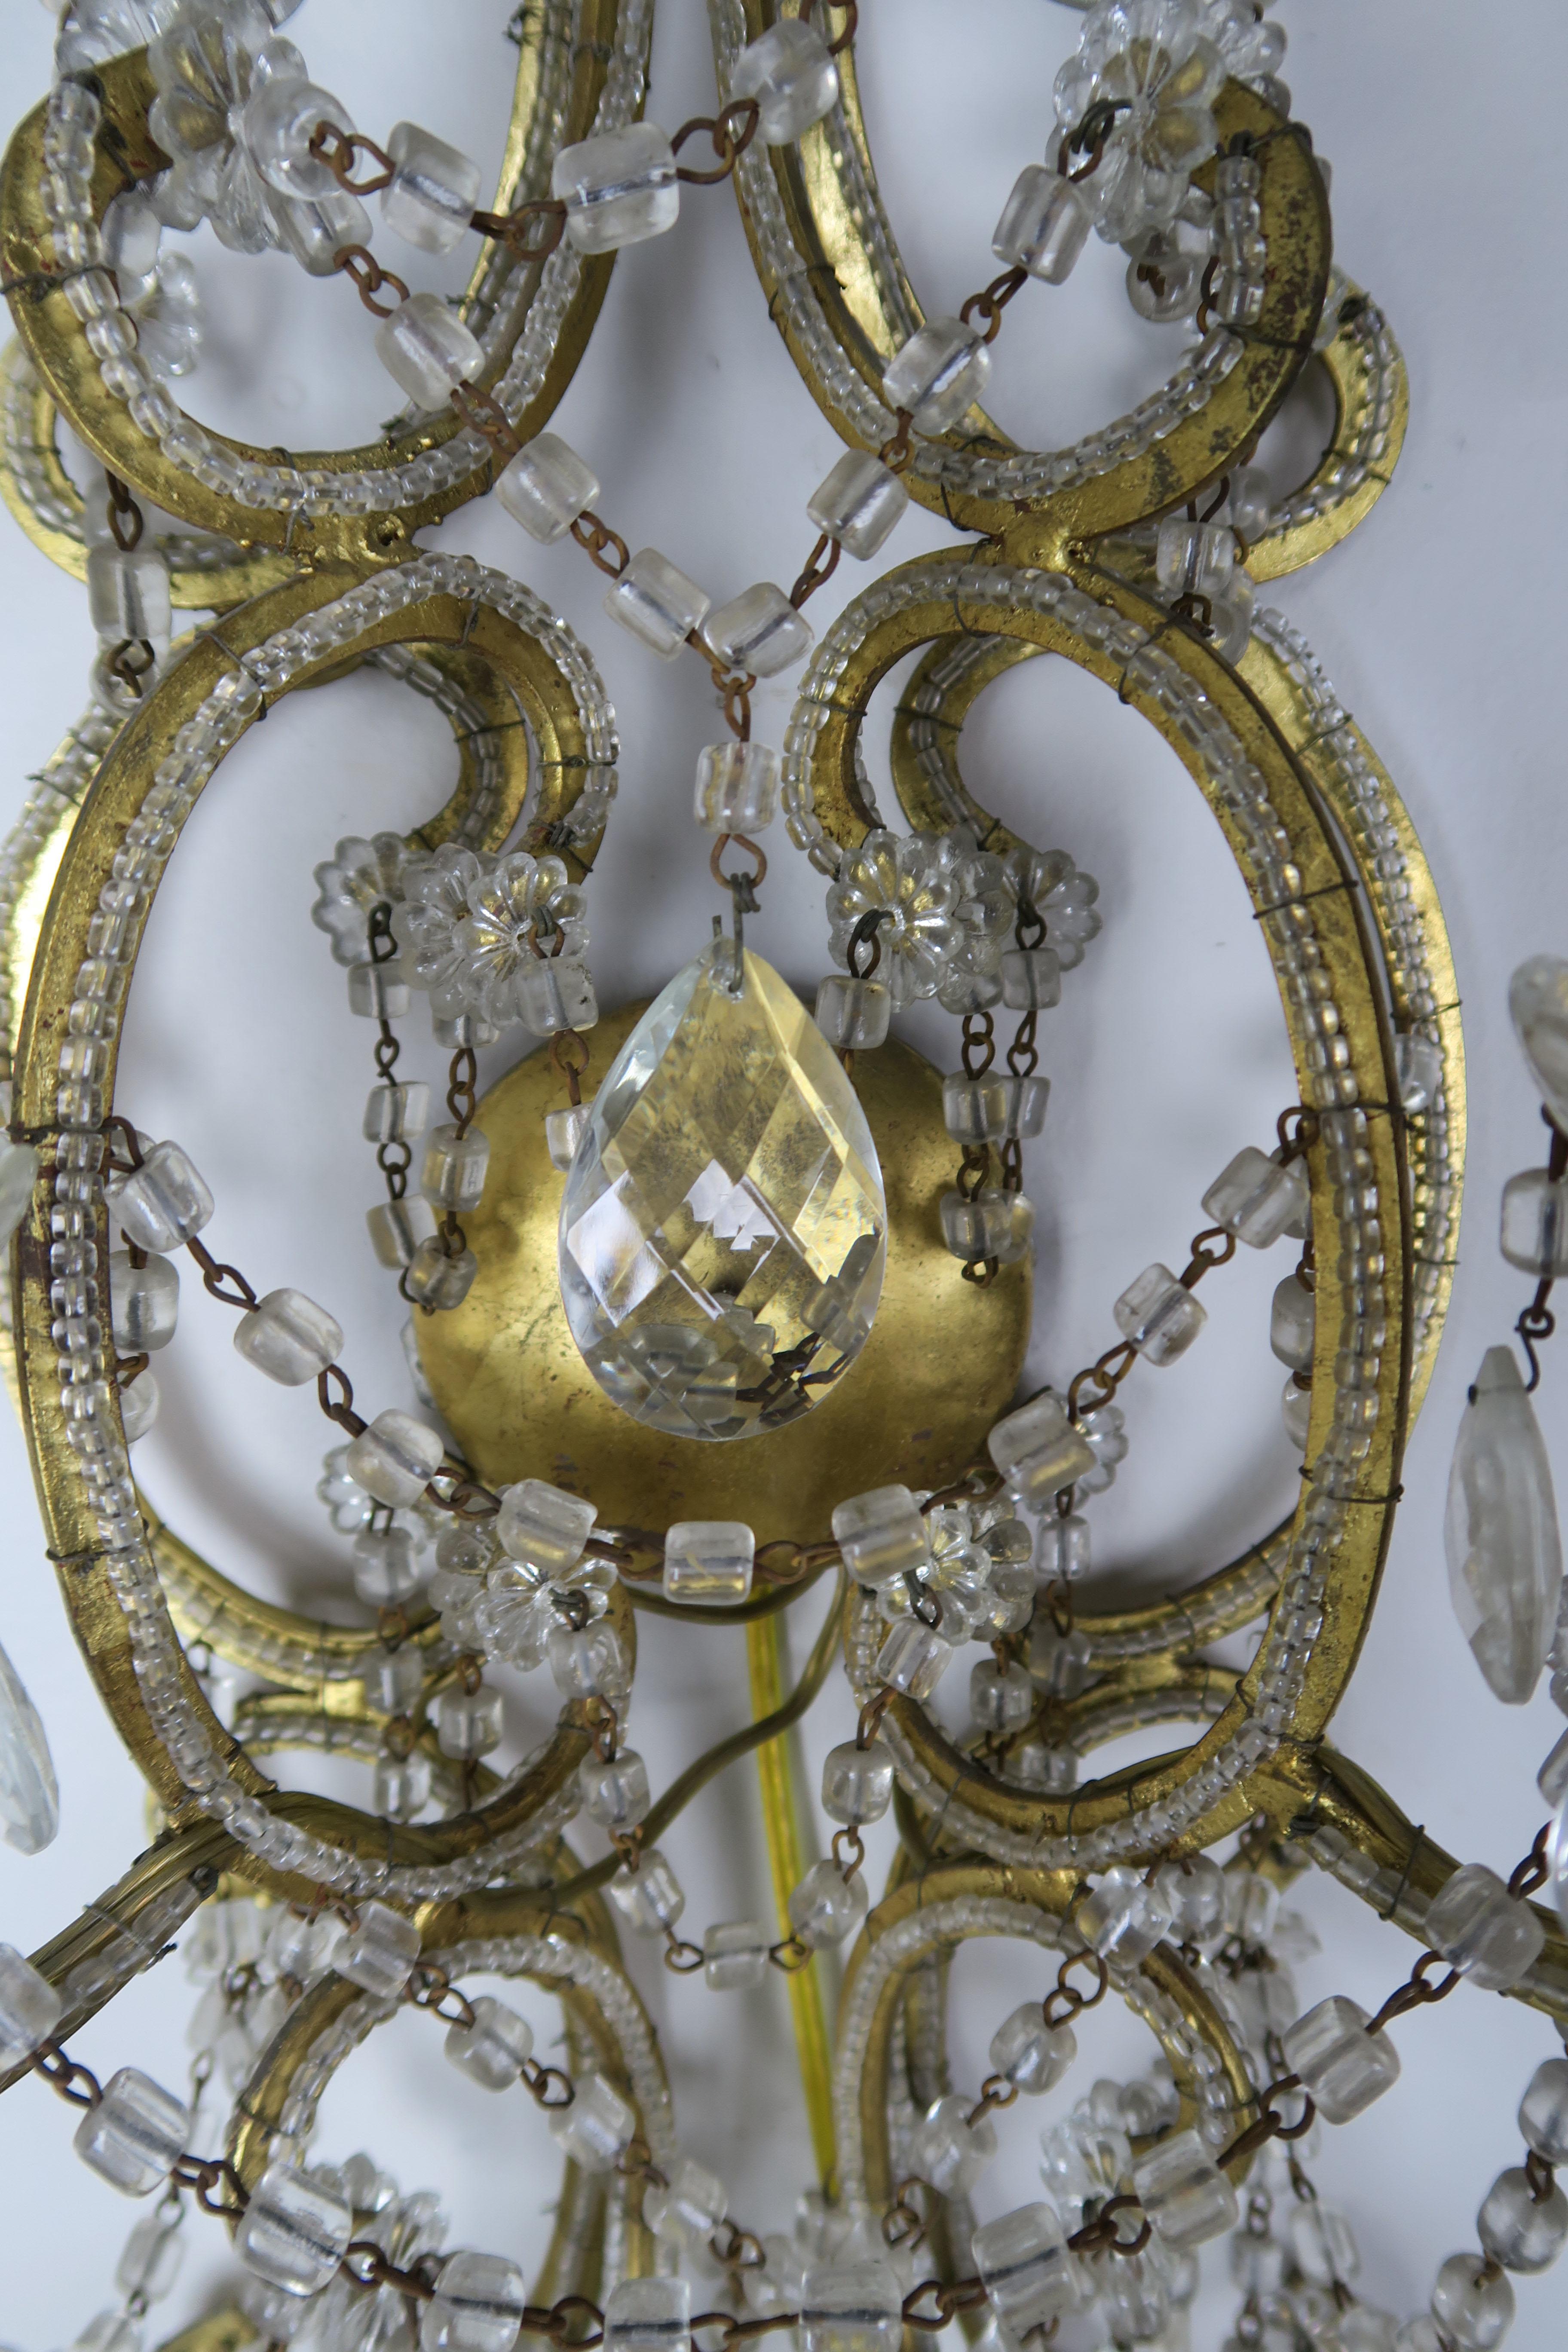 Six-light Italian beaded crystal sconce adorned with garlands of macaroni beads and crystal pendulum drops throughout. The sconce is newly rewired with cream colored drip wax candle covers. Ready to install.